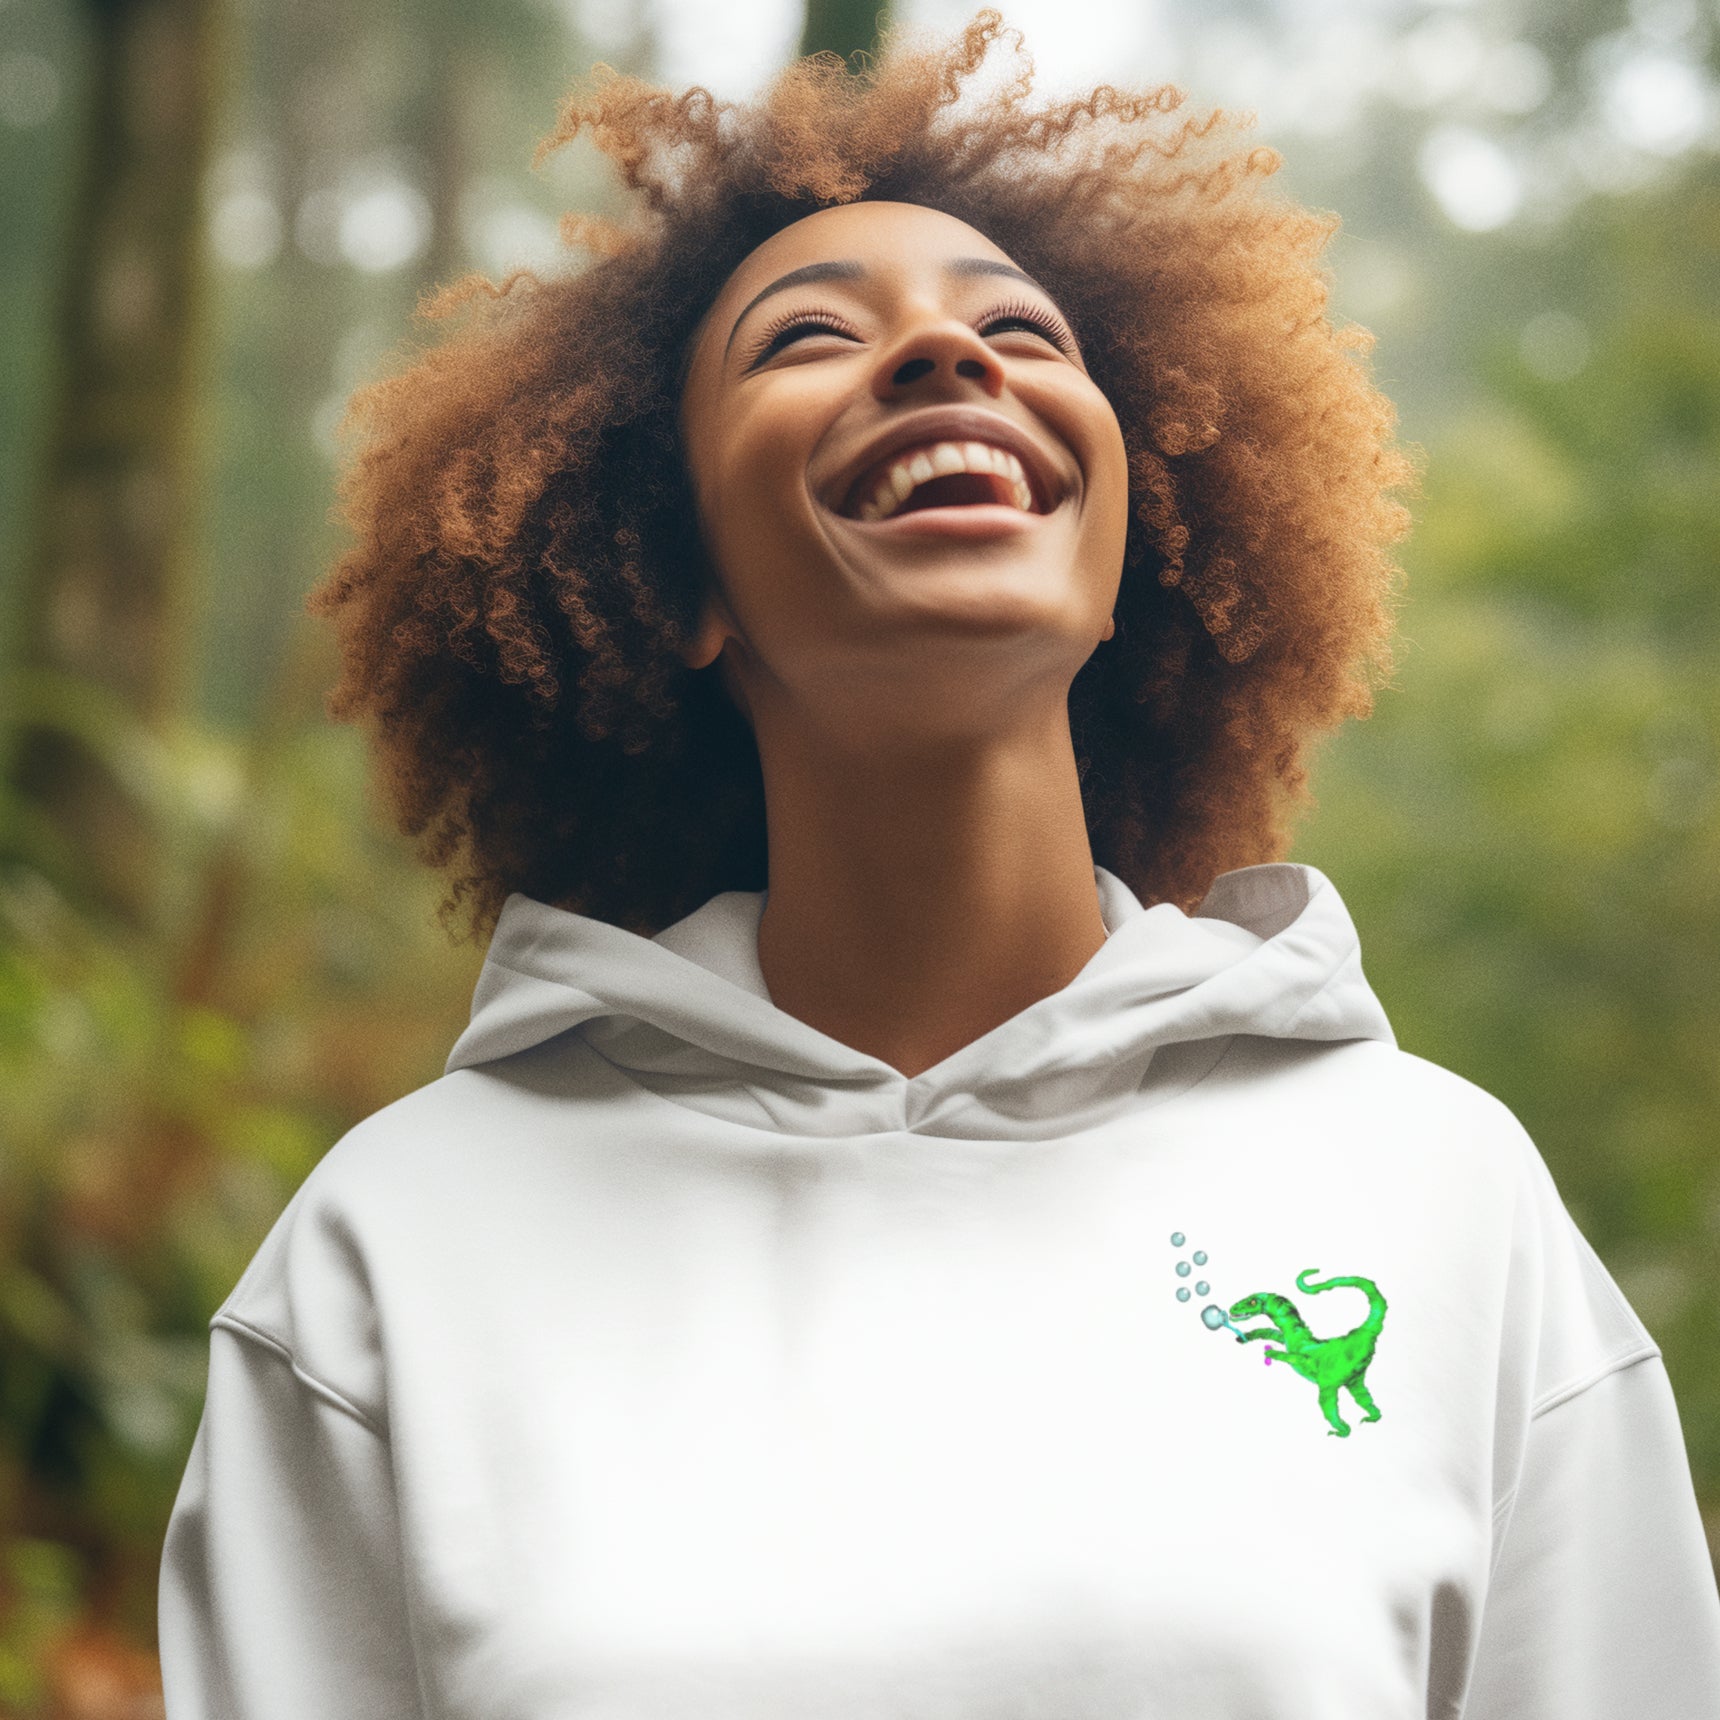 Sustainable Organic Cotton Vegan Hoodie worn by a woman